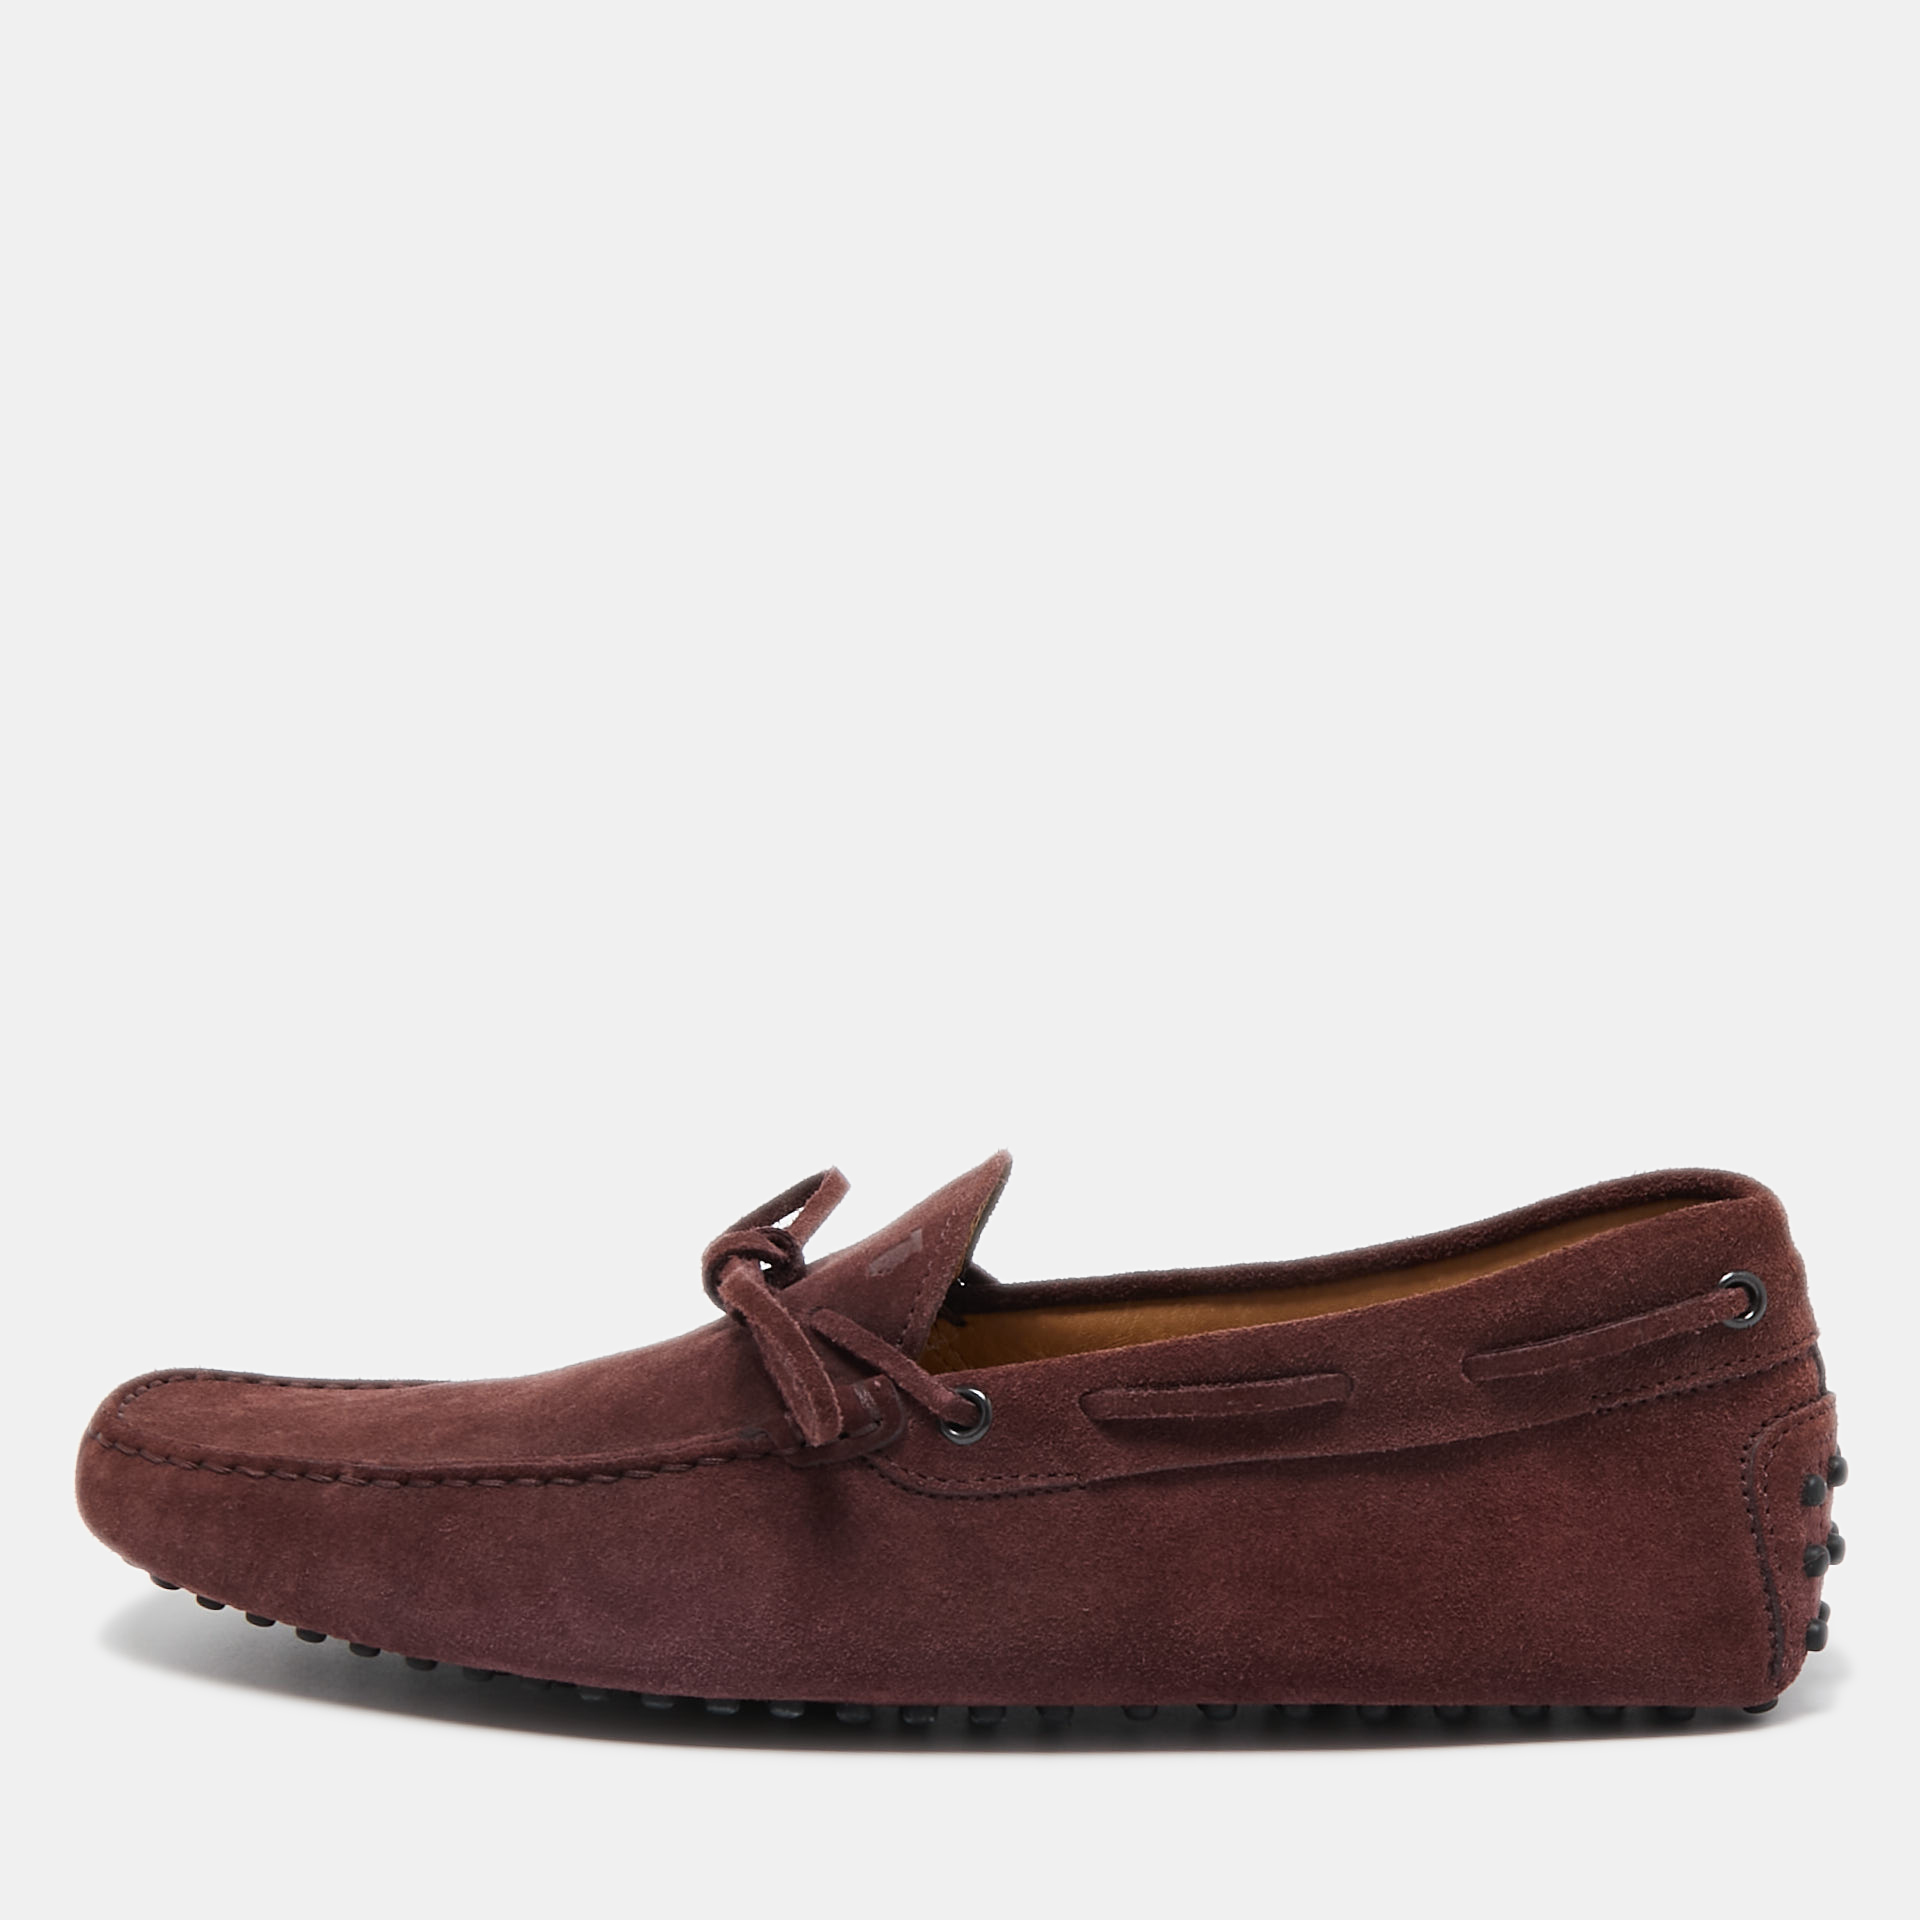 

Tod's Burgundy Suede Bow Slip On Loafers Size